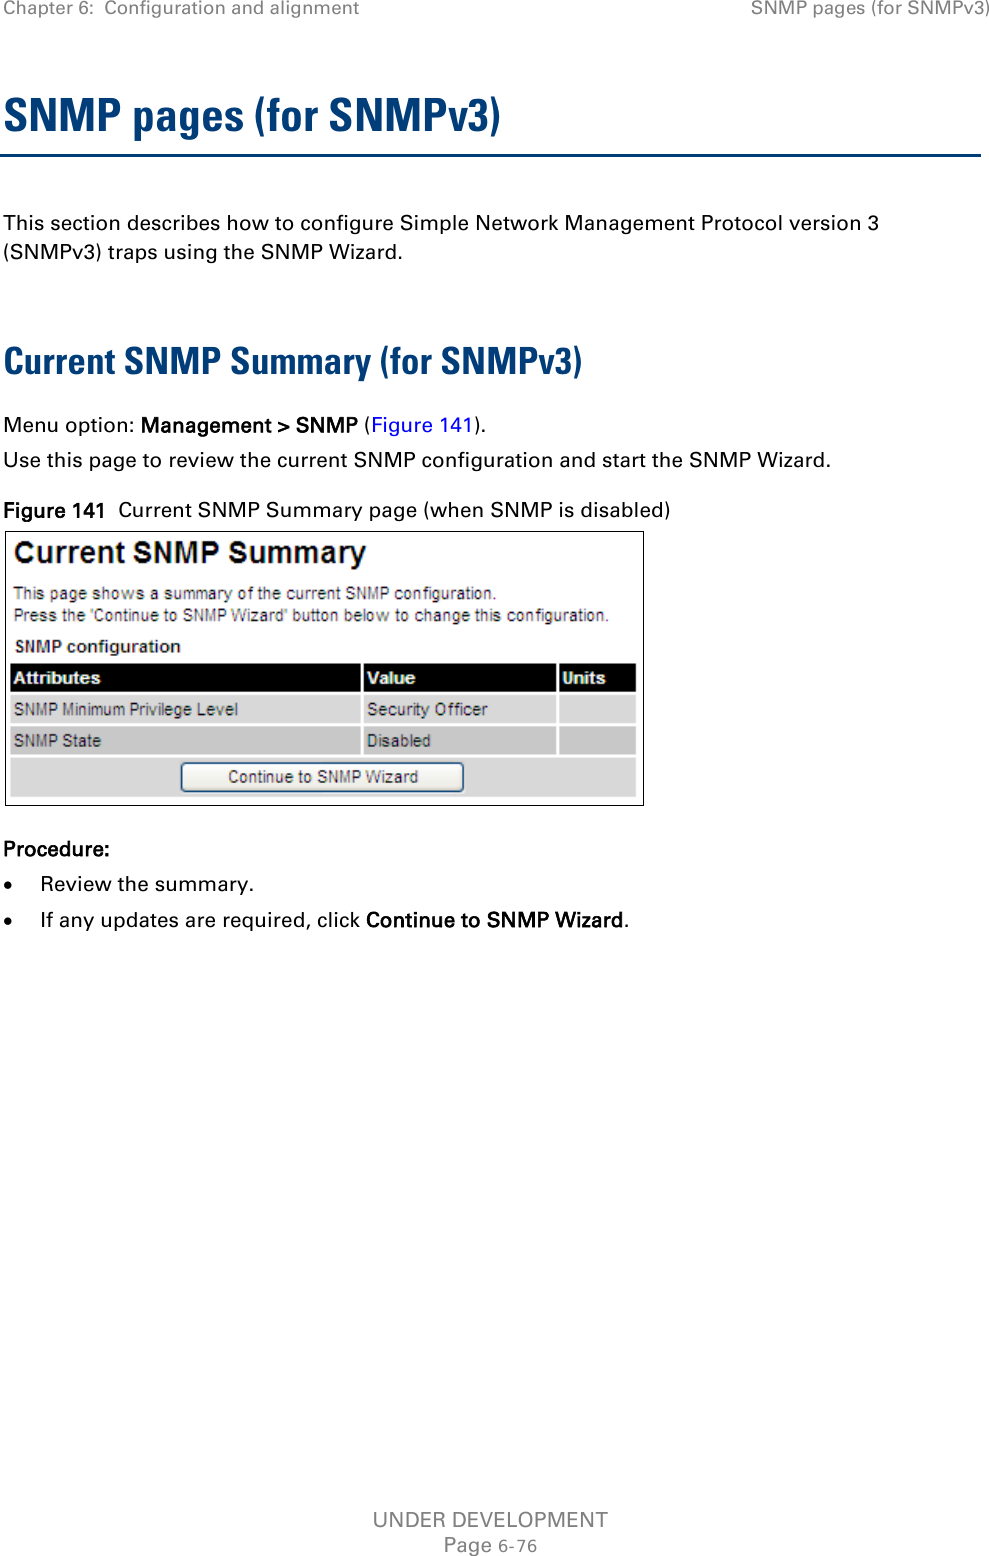 Chapter 6:  Configuration and alignment SNMP pages (for SNMPv3)  SNMP pages (for SNMPv3) This section describes how to configure Simple Network Management Protocol version 3 (SNMPv3) traps using the SNMP Wizard.  Current SNMP Summary (for SNMPv3) Menu option: Management &gt; SNMP (Figure 141). Use this page to review the current SNMP configuration and start the SNMP Wizard. Figure 141  Current SNMP Summary page (when SNMP is disabled)  Procedure: • Review the summary. • If any updates are required, click Continue to SNMP Wizard.  UNDER DEVELOPMENT Page 6-76 